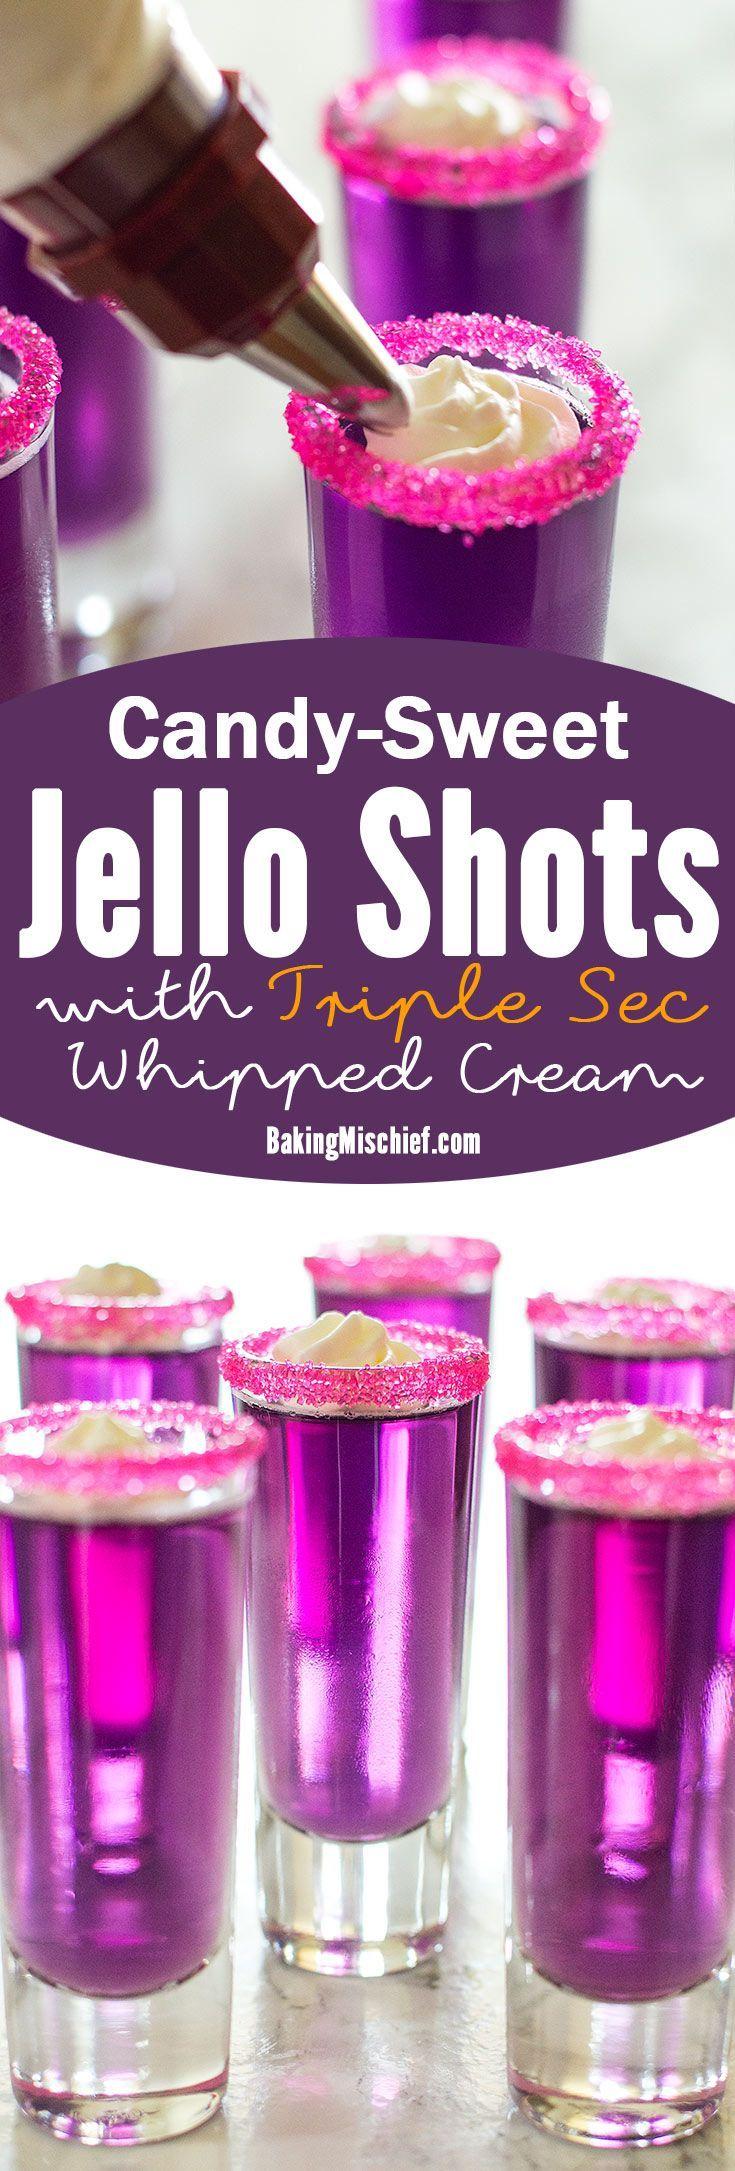 Wedding - Candy-Sweet Jello Shots With Triple Sec Whipped Cream